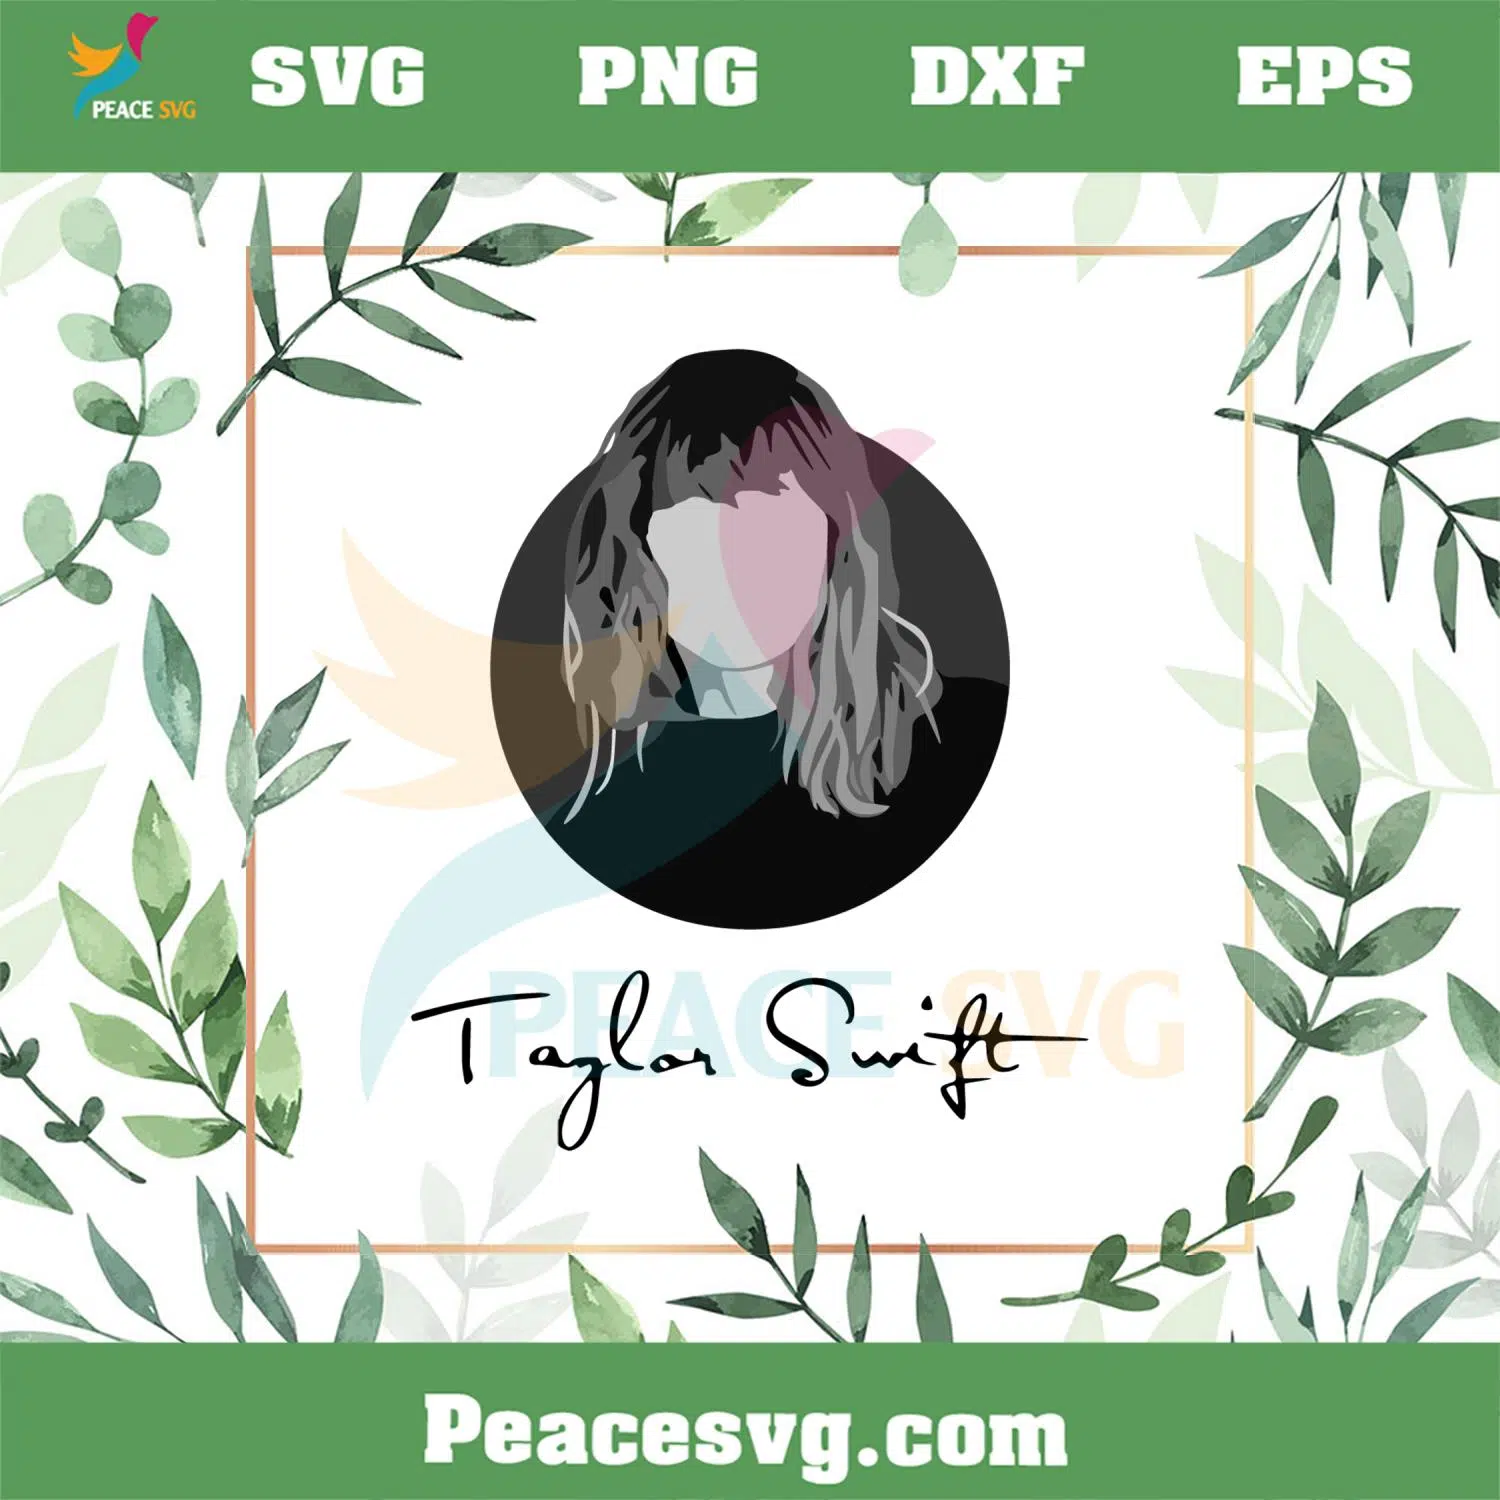 Taylor Swiftie SVG Cutting File for Personal Commercial Uses